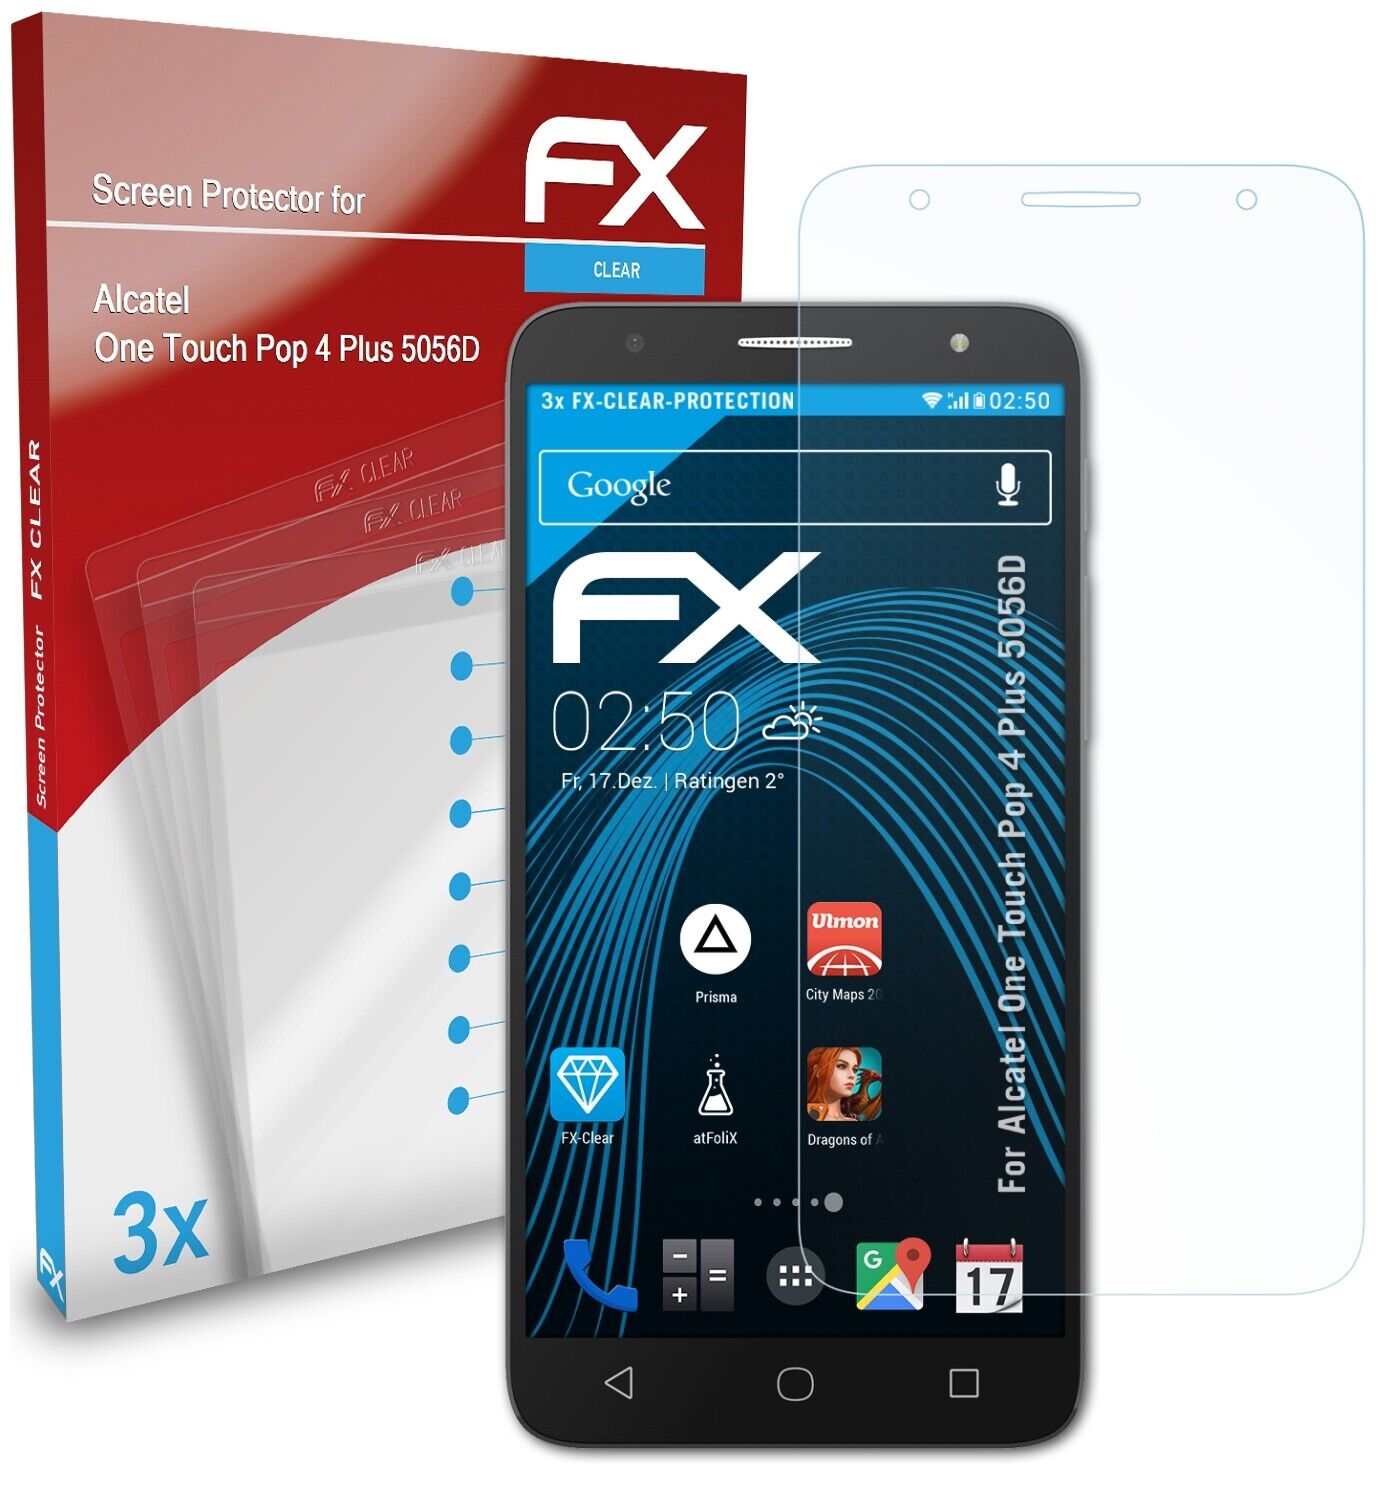 Profetie incident Marxistisch atFoliX 3x Screen Protector for Alcatel One Touch Pop 4 Plus 5056D clear  4050512168947 | eBay